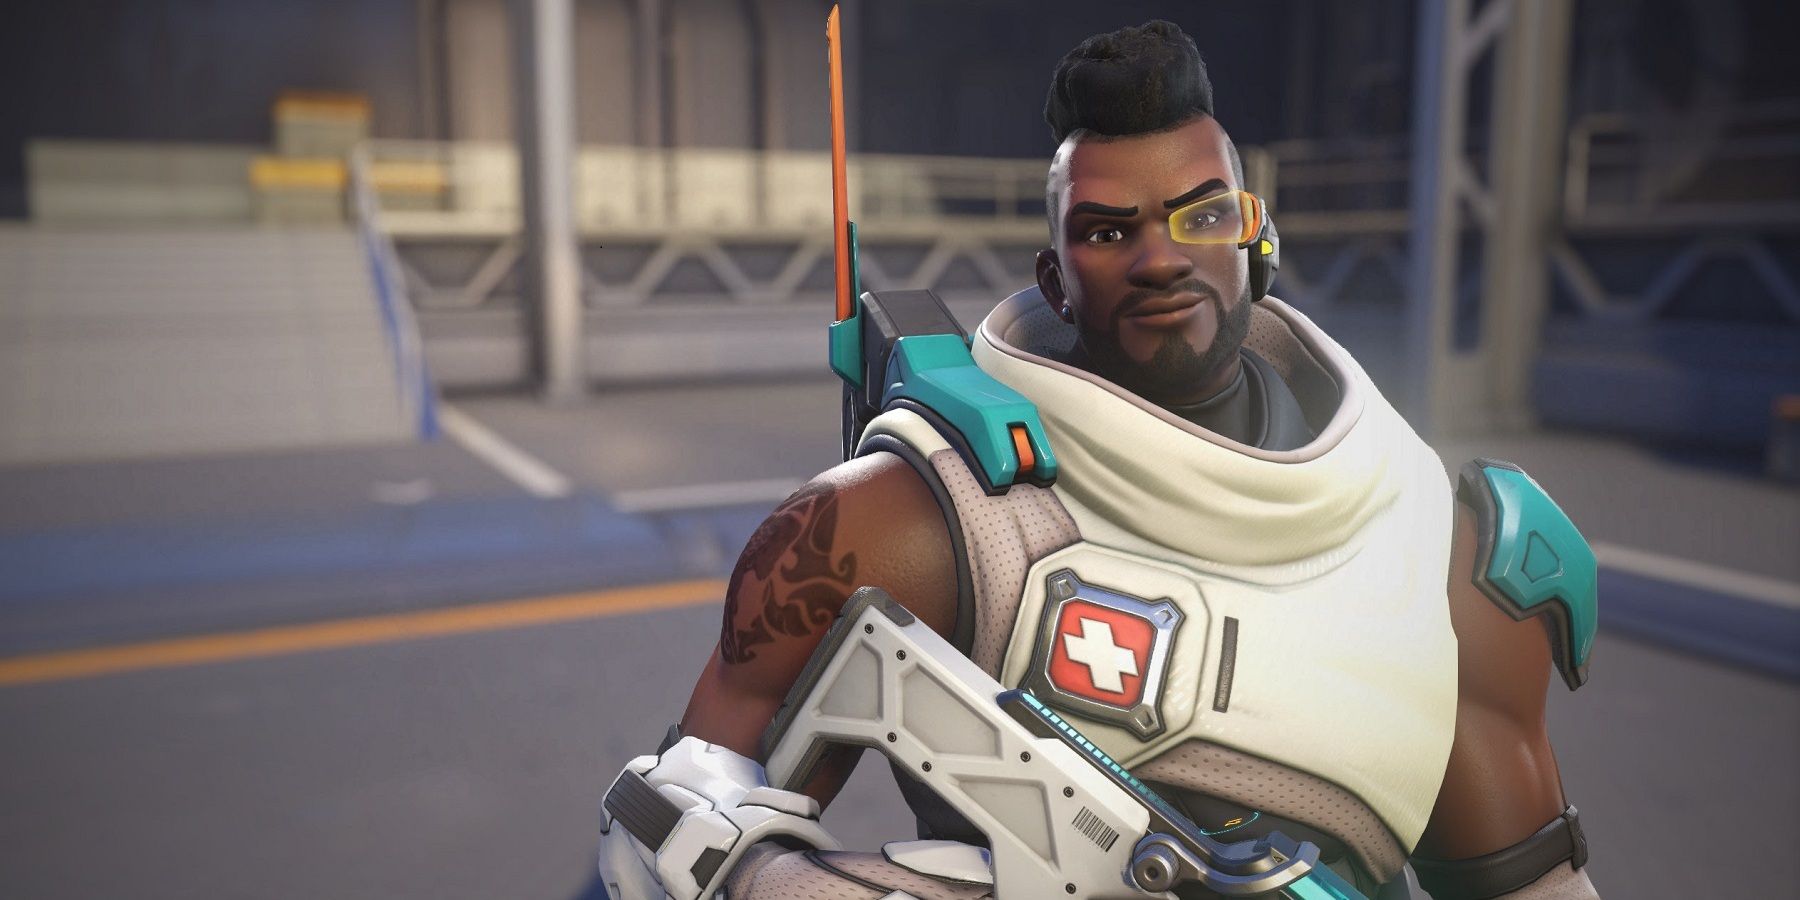 Why Overwatch's Two Gay Characters Are So Important